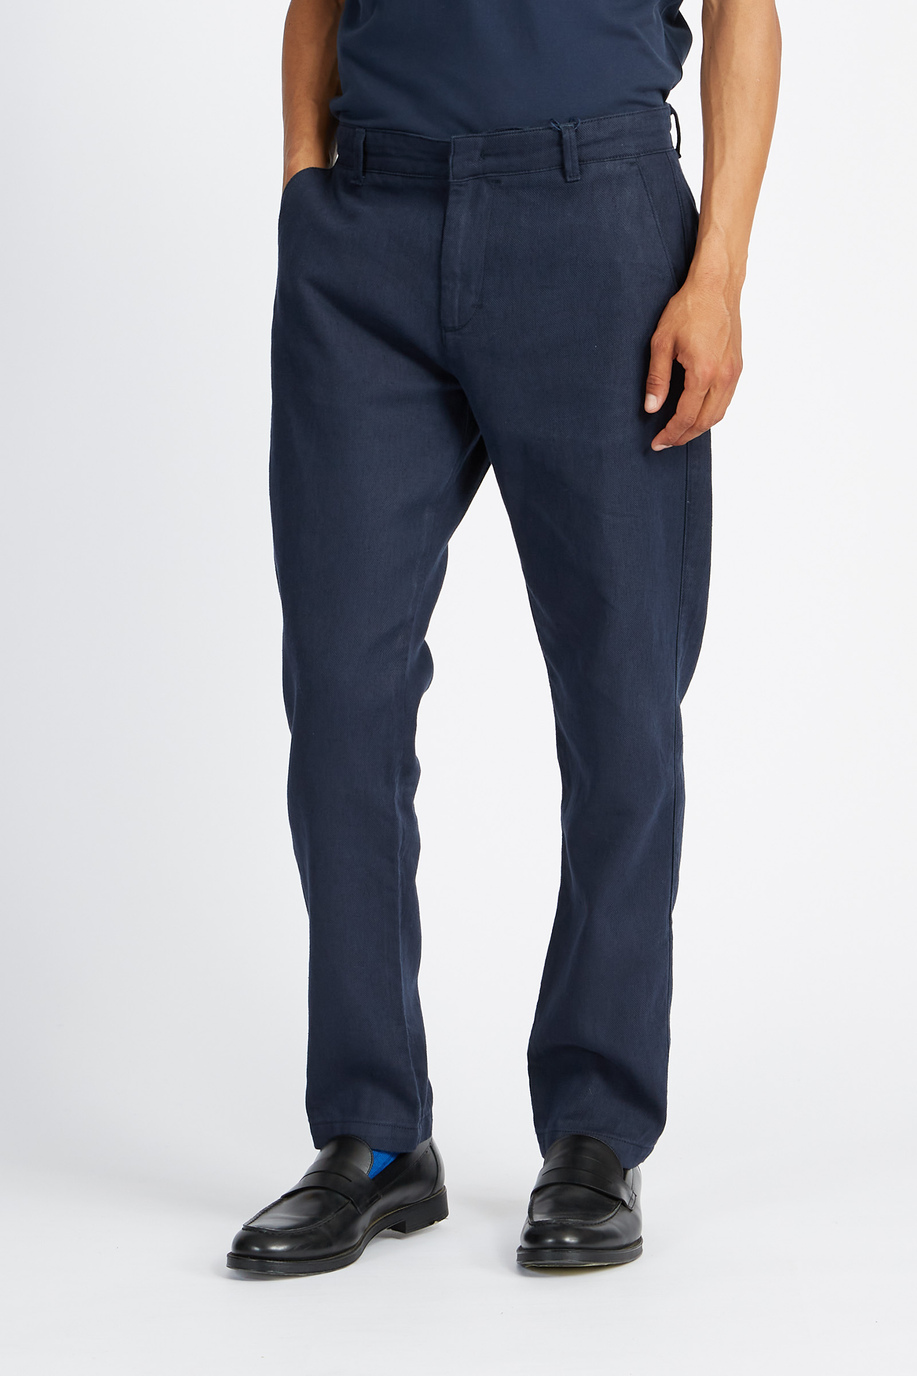 Straight cut men's chino trousers in plain color Logos - Vickan - Elegant looks for him | La Martina - Official Online Shop